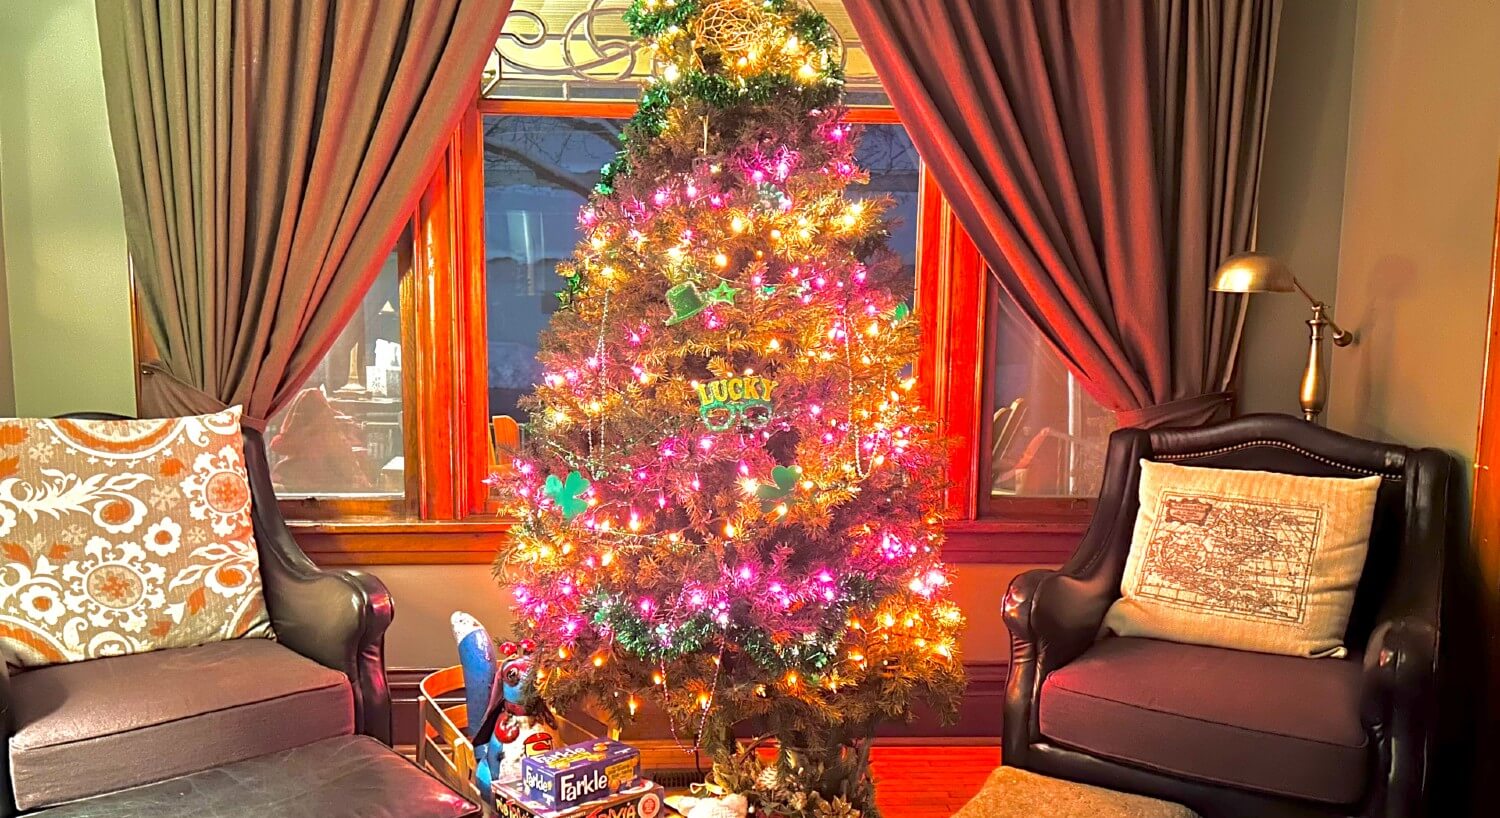 Living room of a home with a Christmas tree and gifts between two black leather chairs